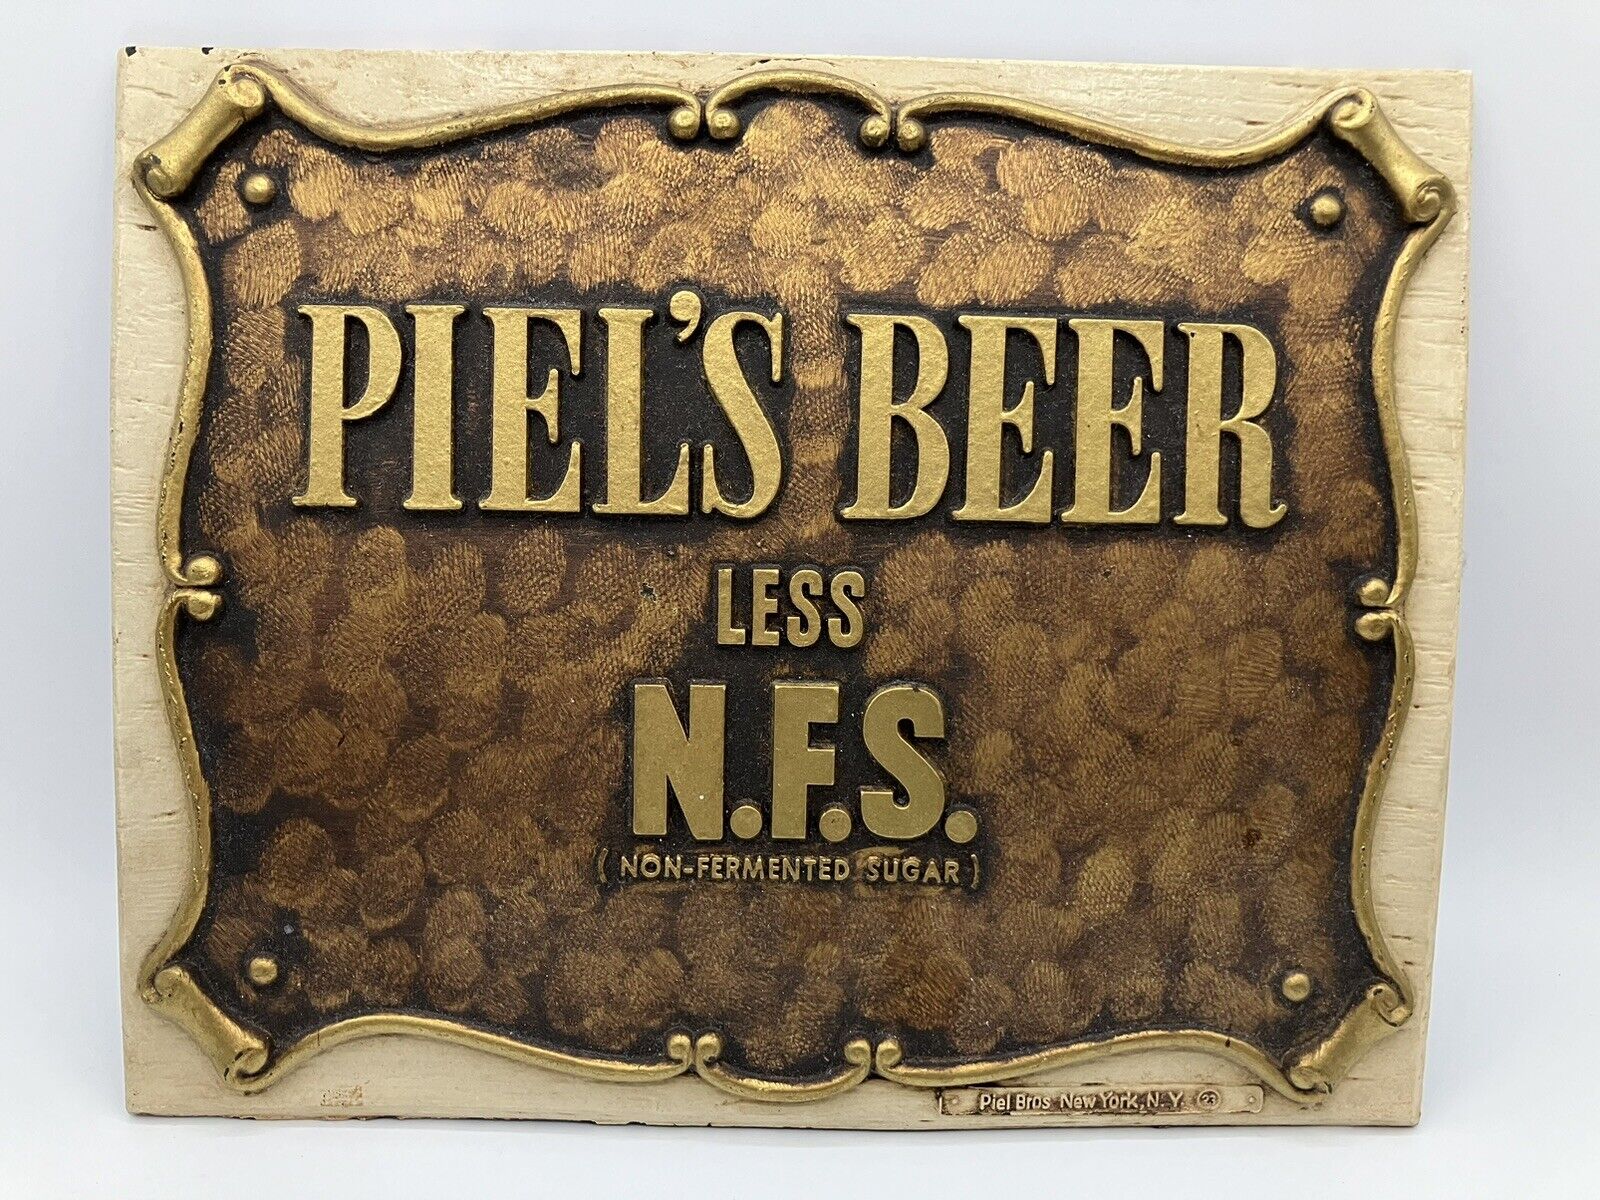 Piel\'s Beer Less NFS Piel Bros NY NY composition sign 11” x 8.75”